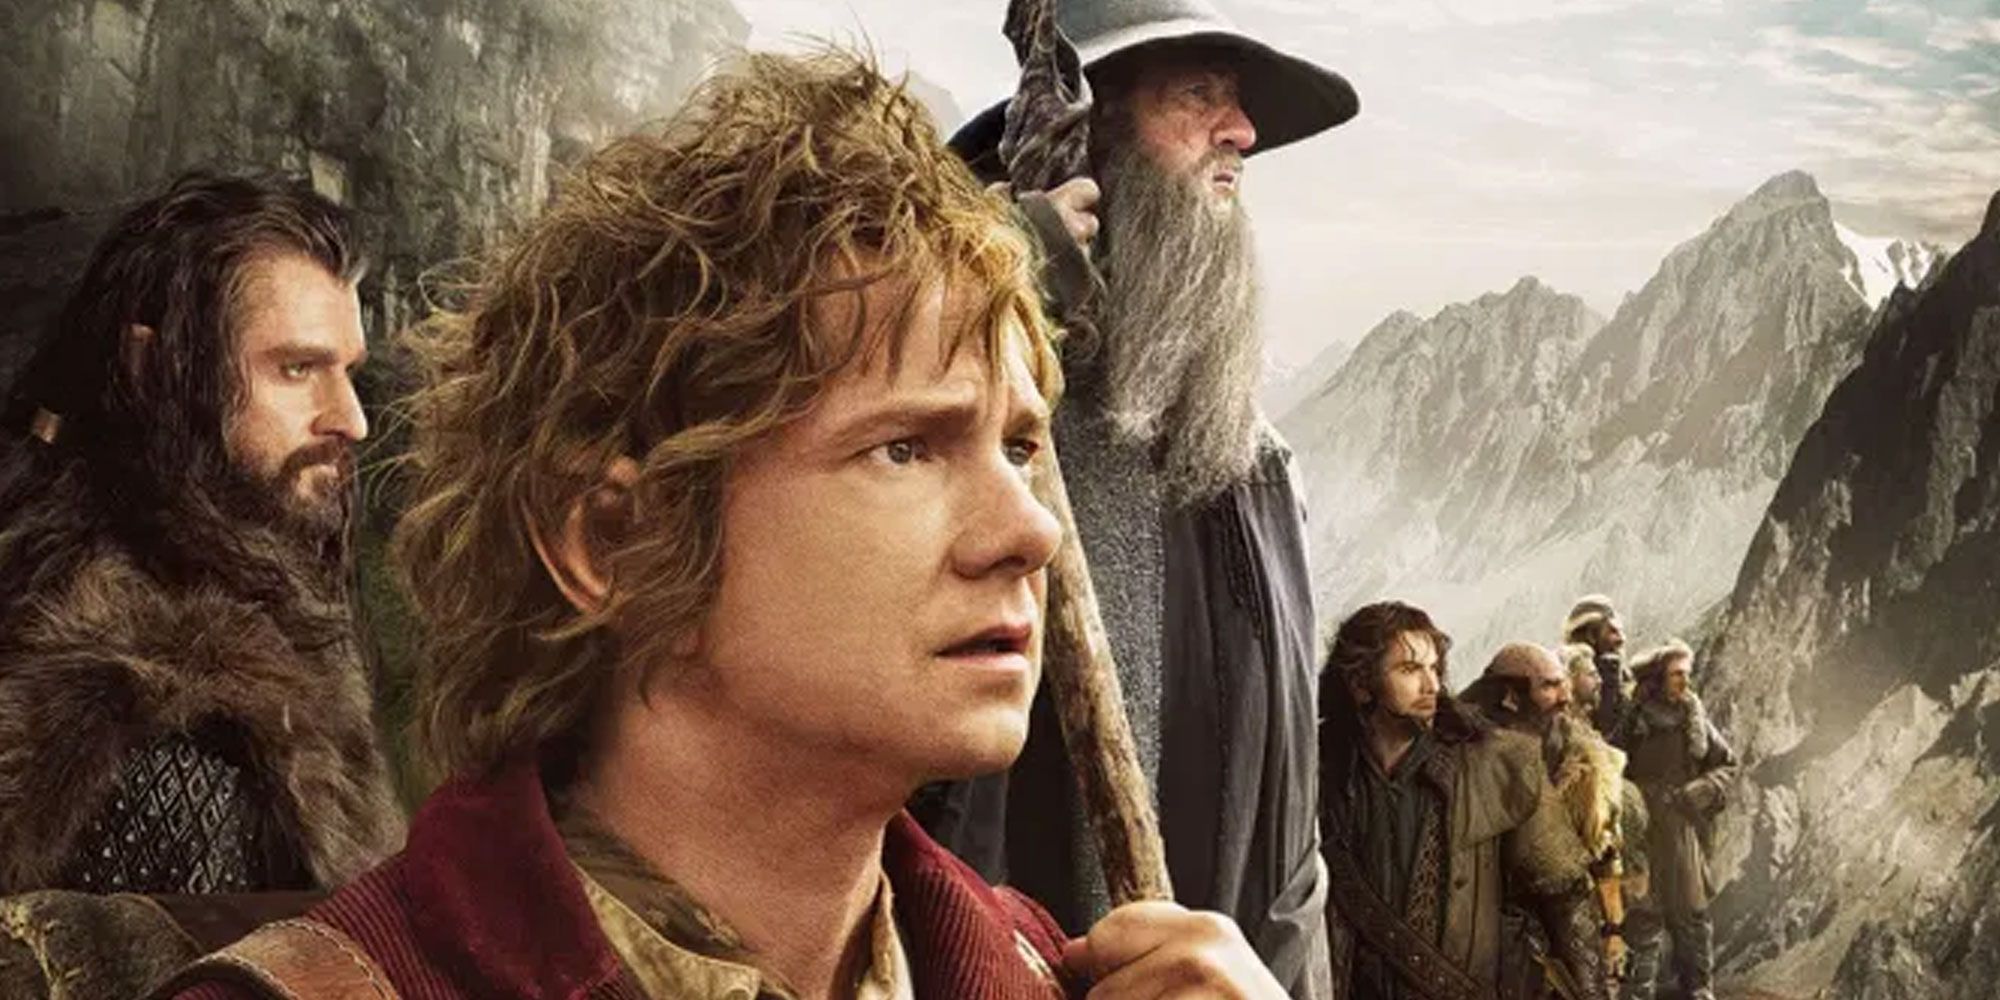 The cast of The Hobbit looking into the distance